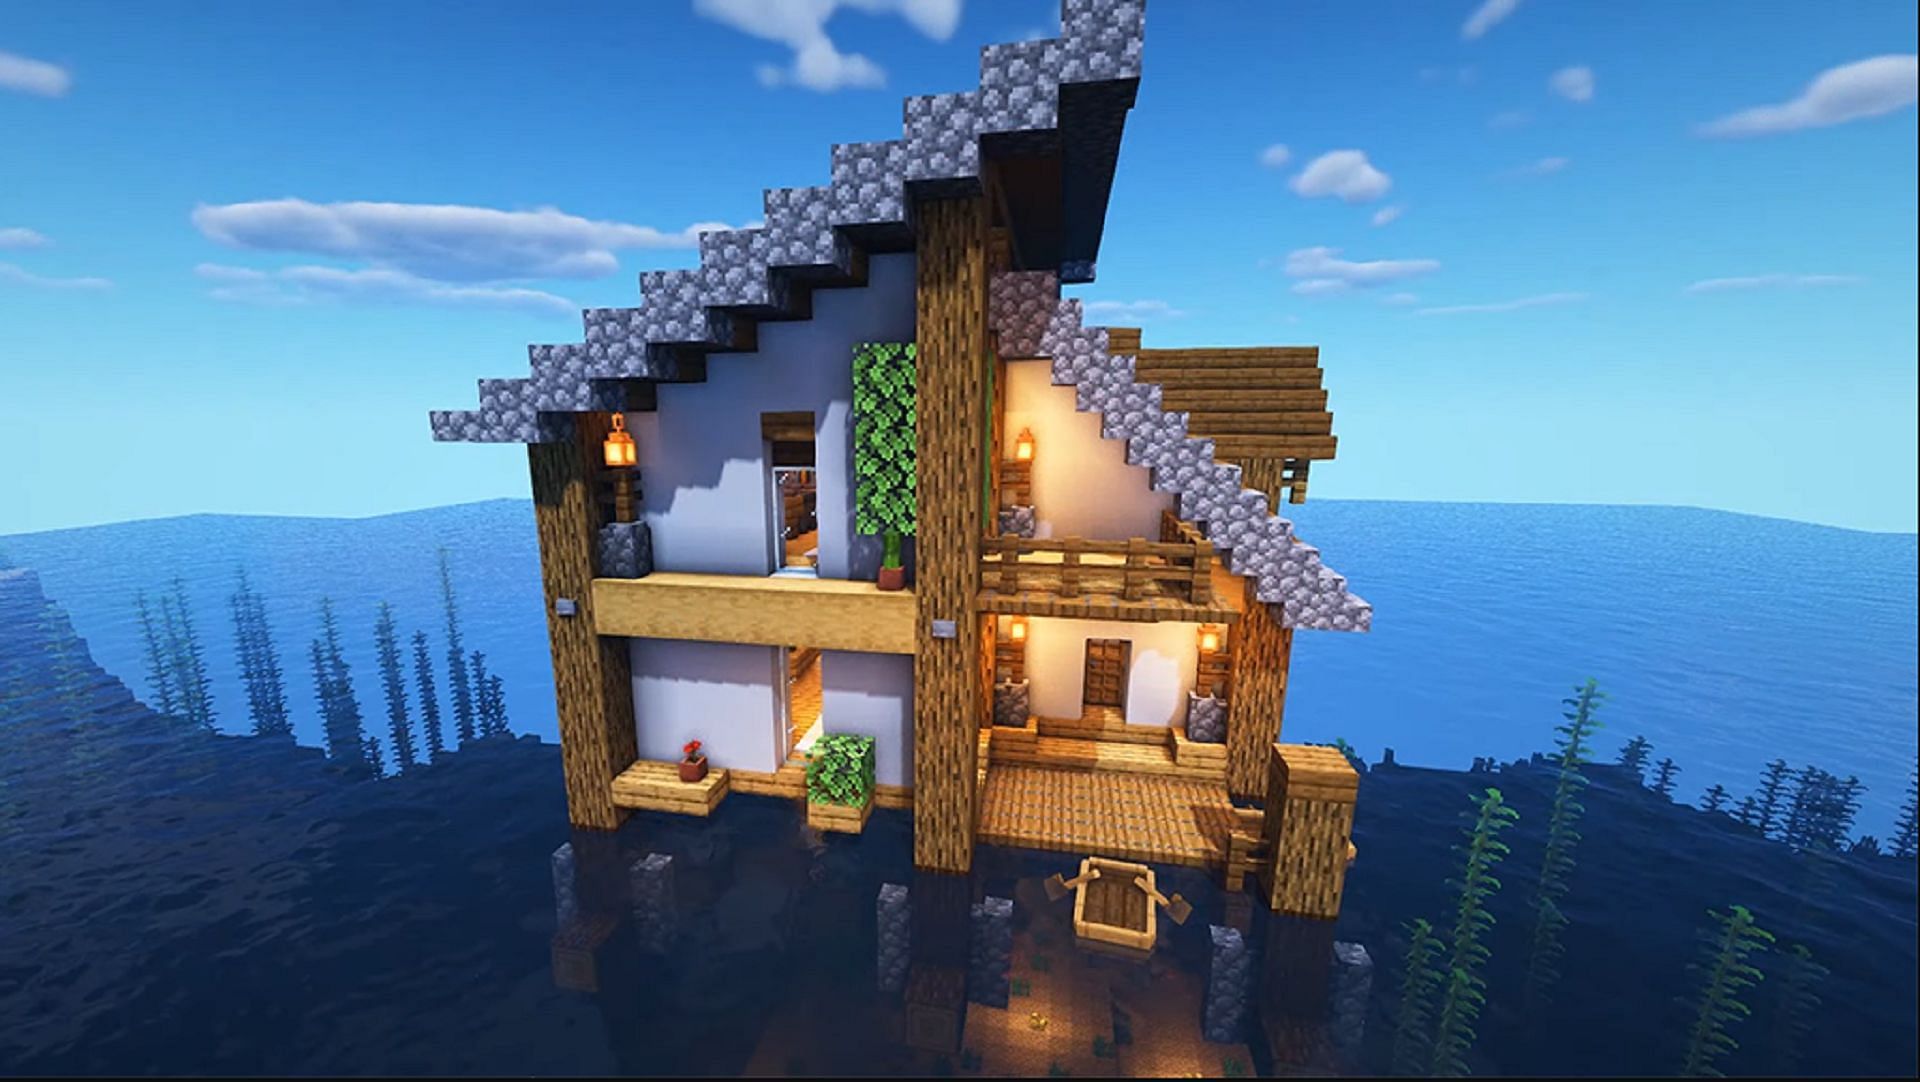 This home can be tough to build but keeps players safe better than most (Image via Random Steve Guy/YouTube)